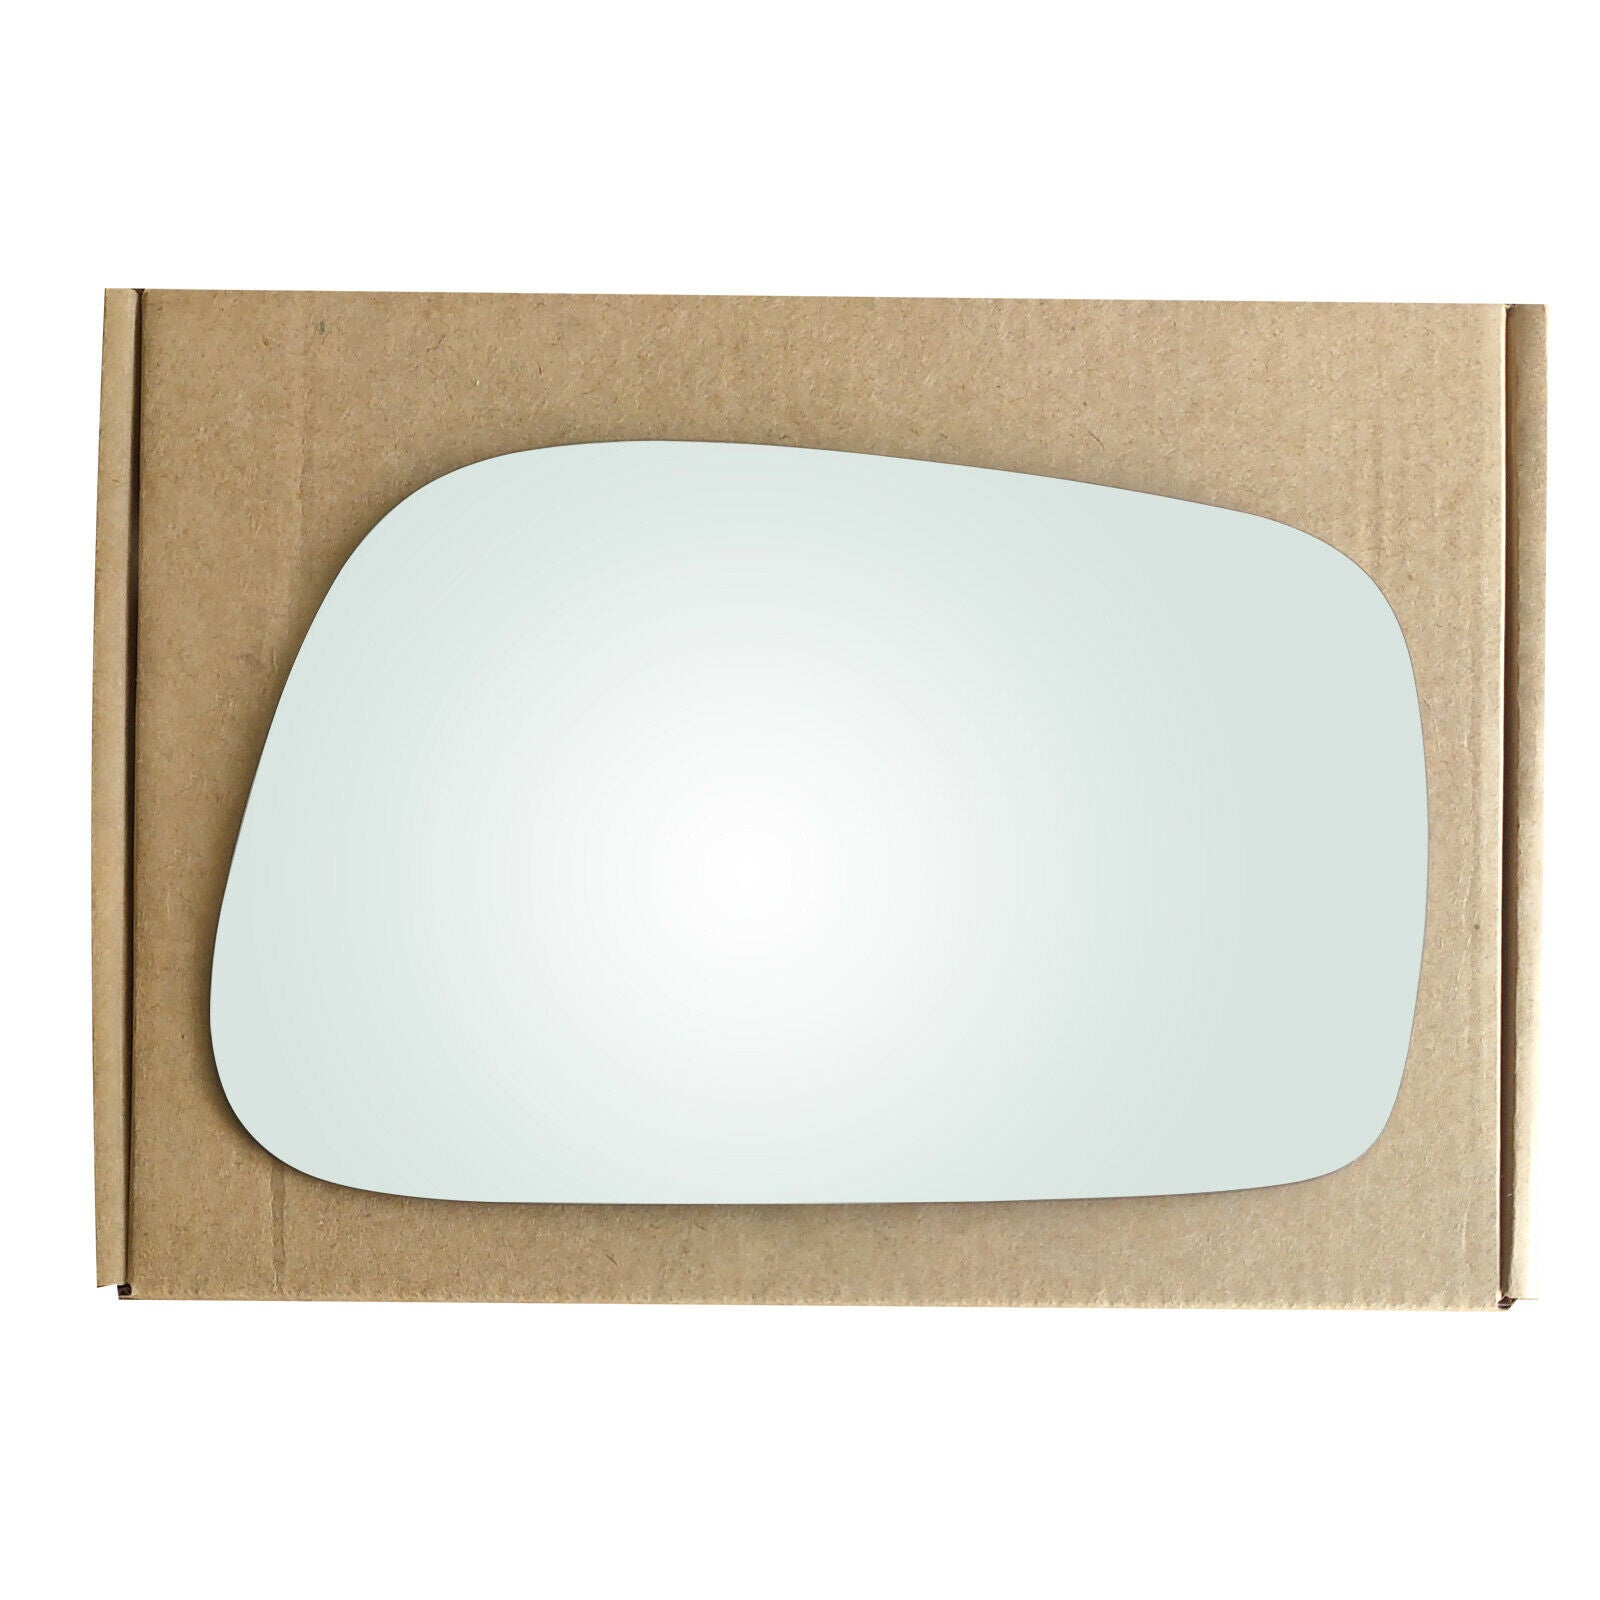 WLLW Replacement Mirror Glass for 2003-2008 Toyota Corolla/Toyota Matrix/Pontiac Vibe, Driver Left Side LH/Passenger Right Side RH/The Both Sides Flat Convex M-0052